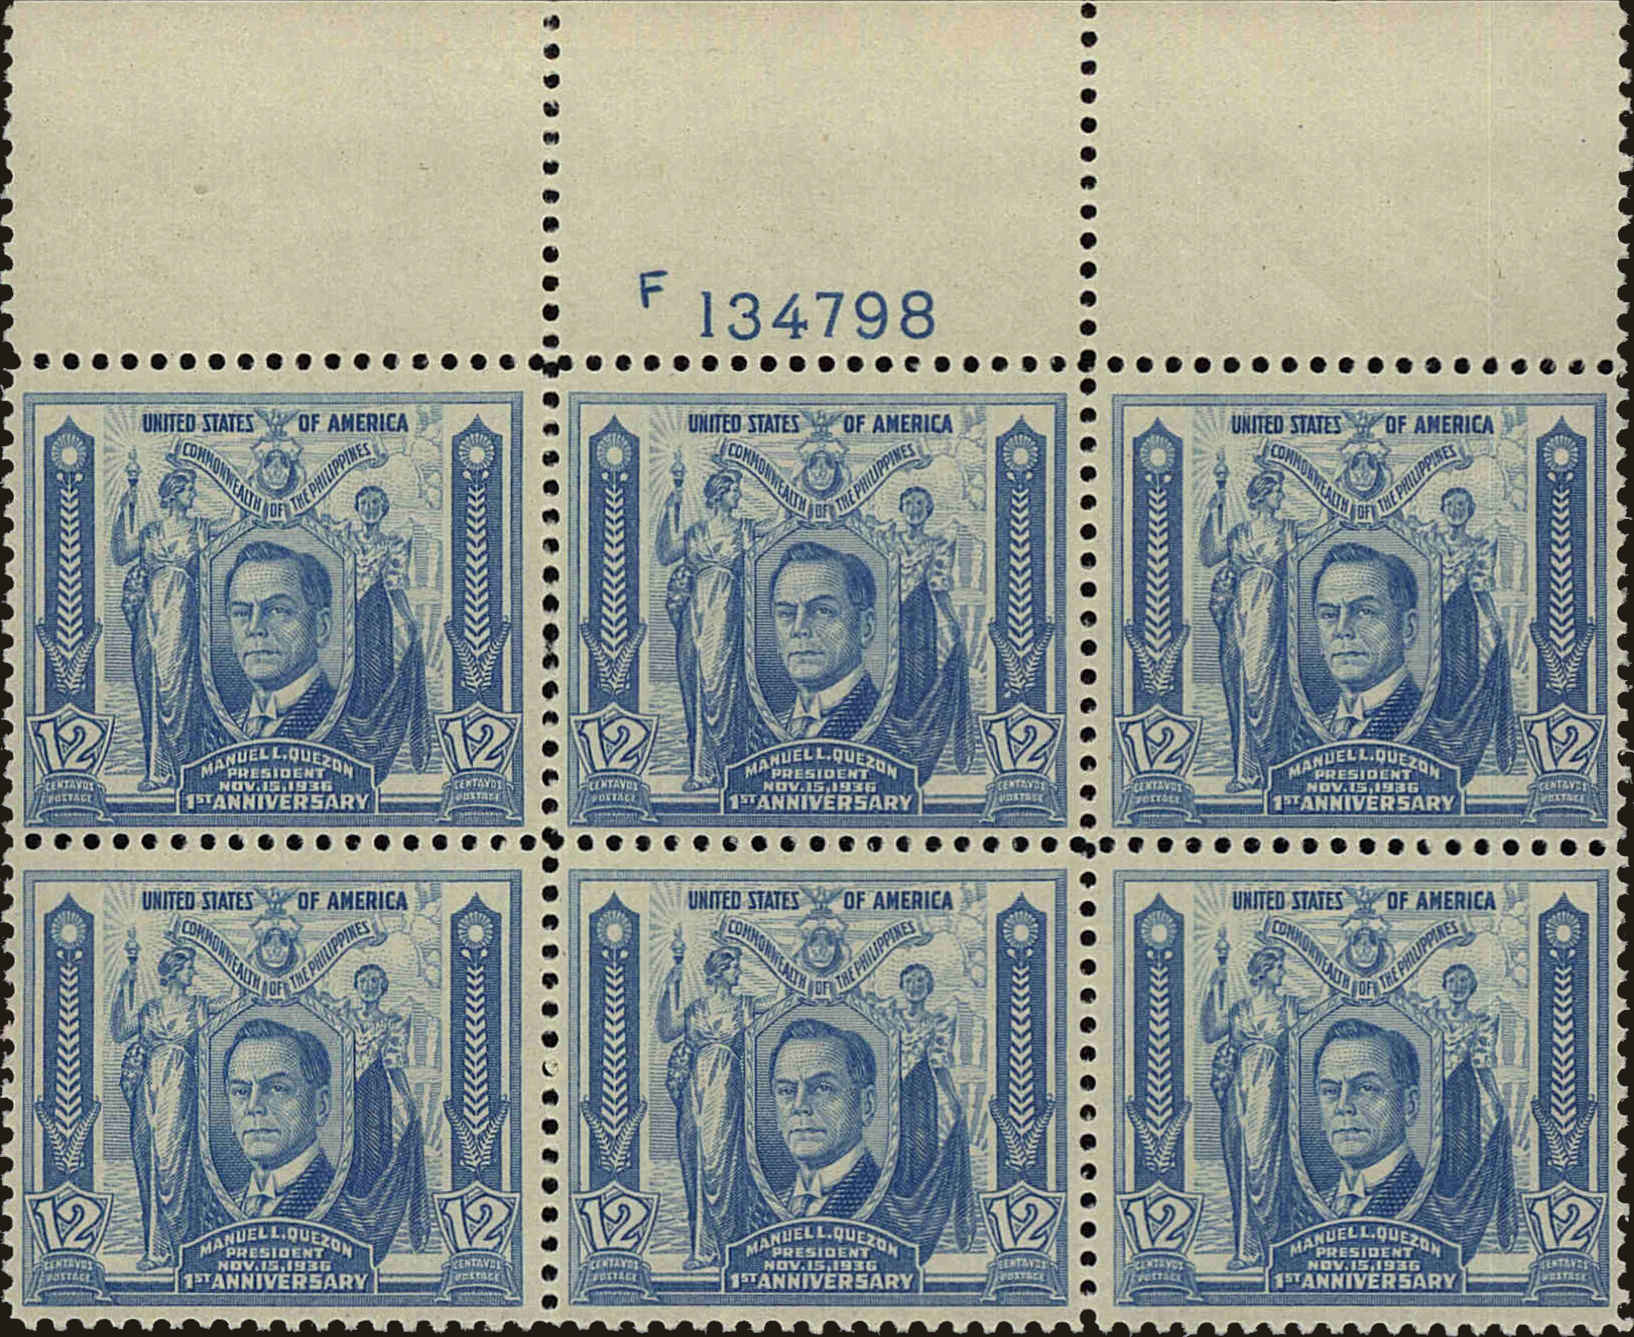 Front view of Philippines (US) 408 collectors stamp